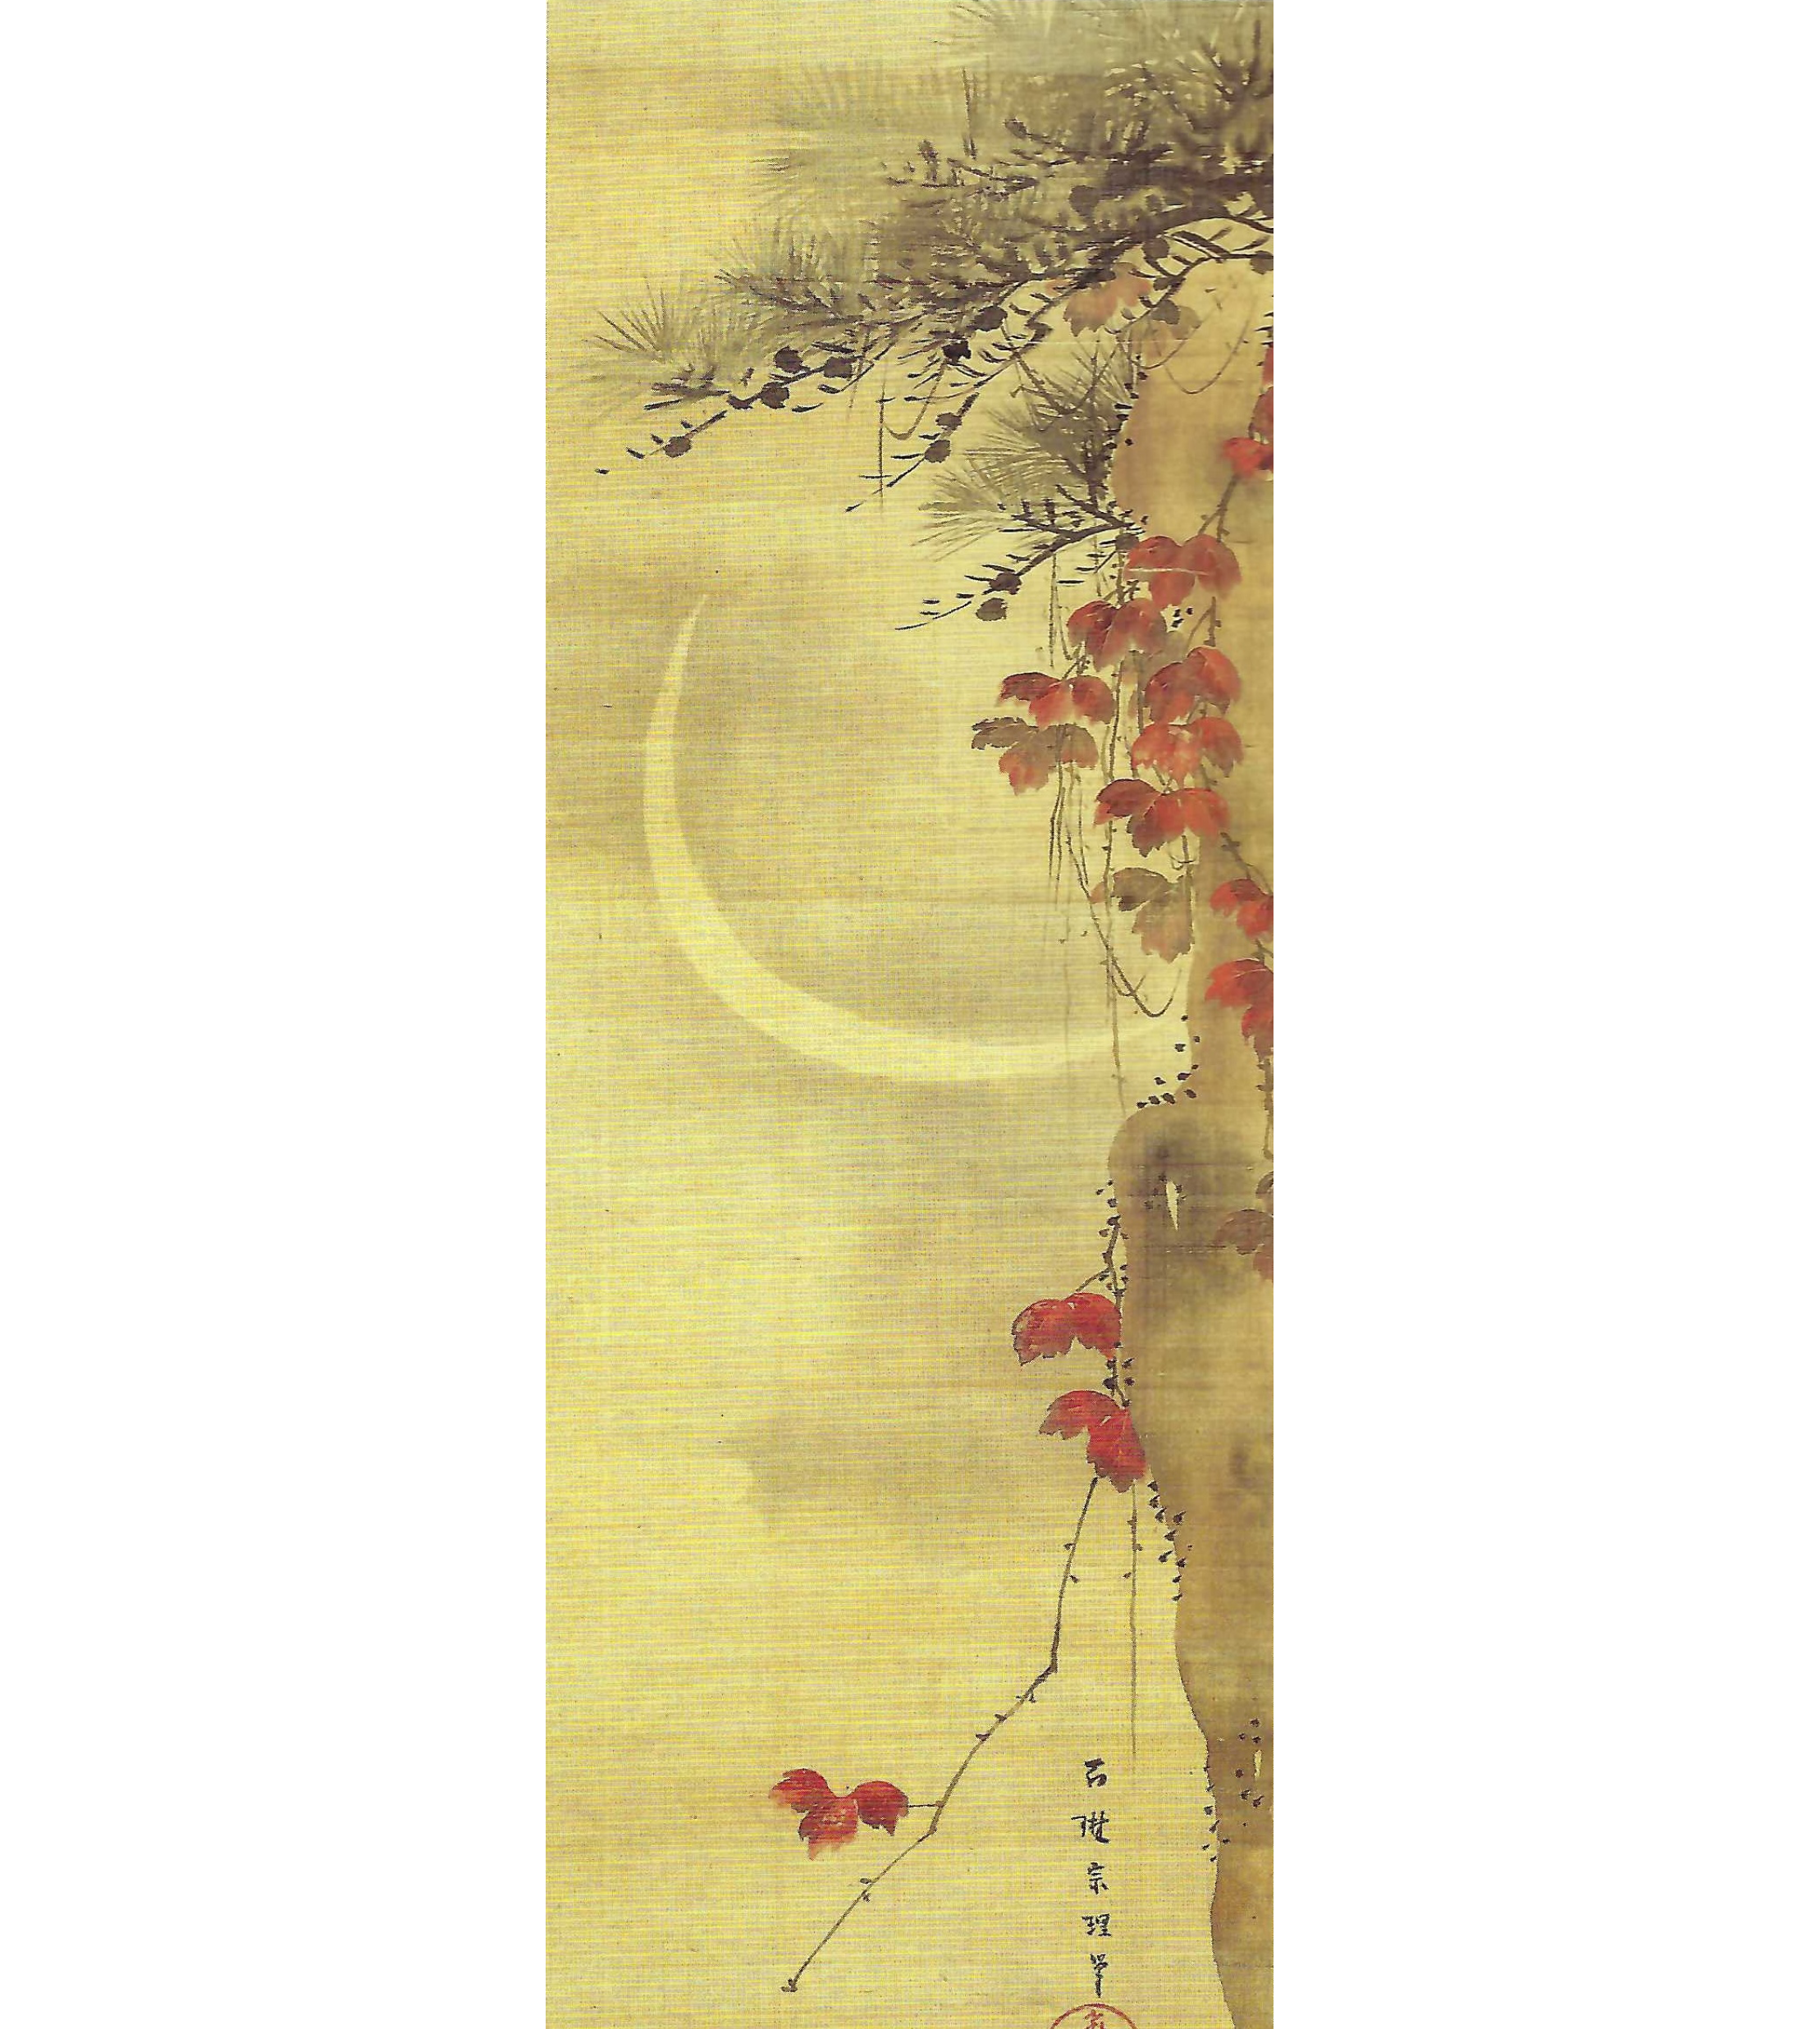 Image of Jpanaese screen with pine tree and vines with red leaves on right, a crescent moon in upper back, on a gold background